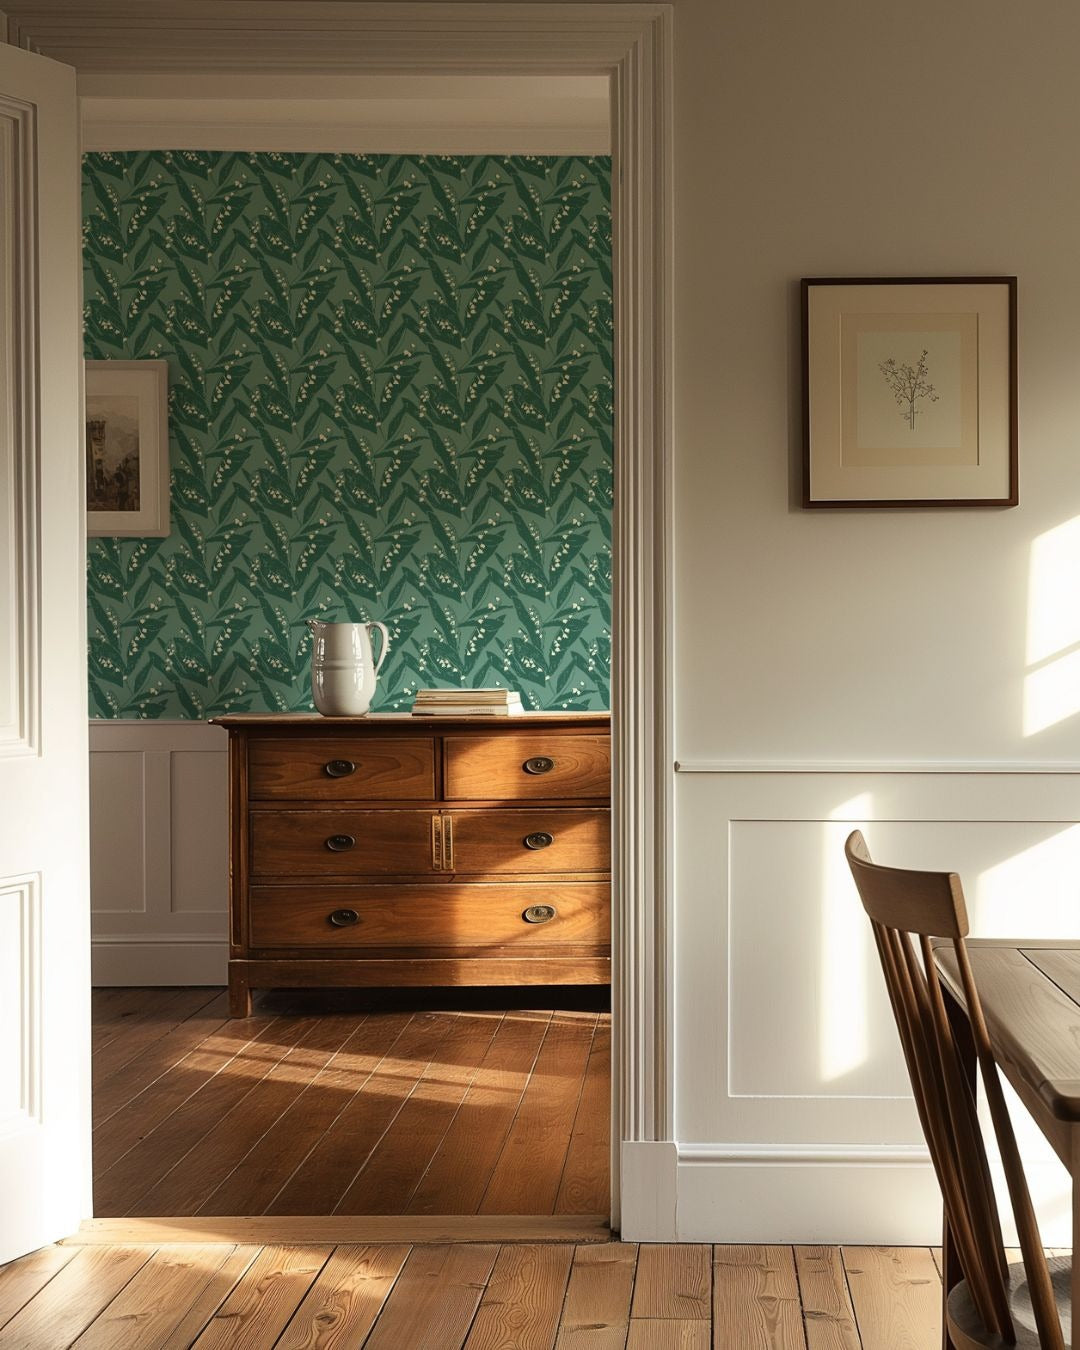 Green Wallpaper: Design Ideas for Every Room